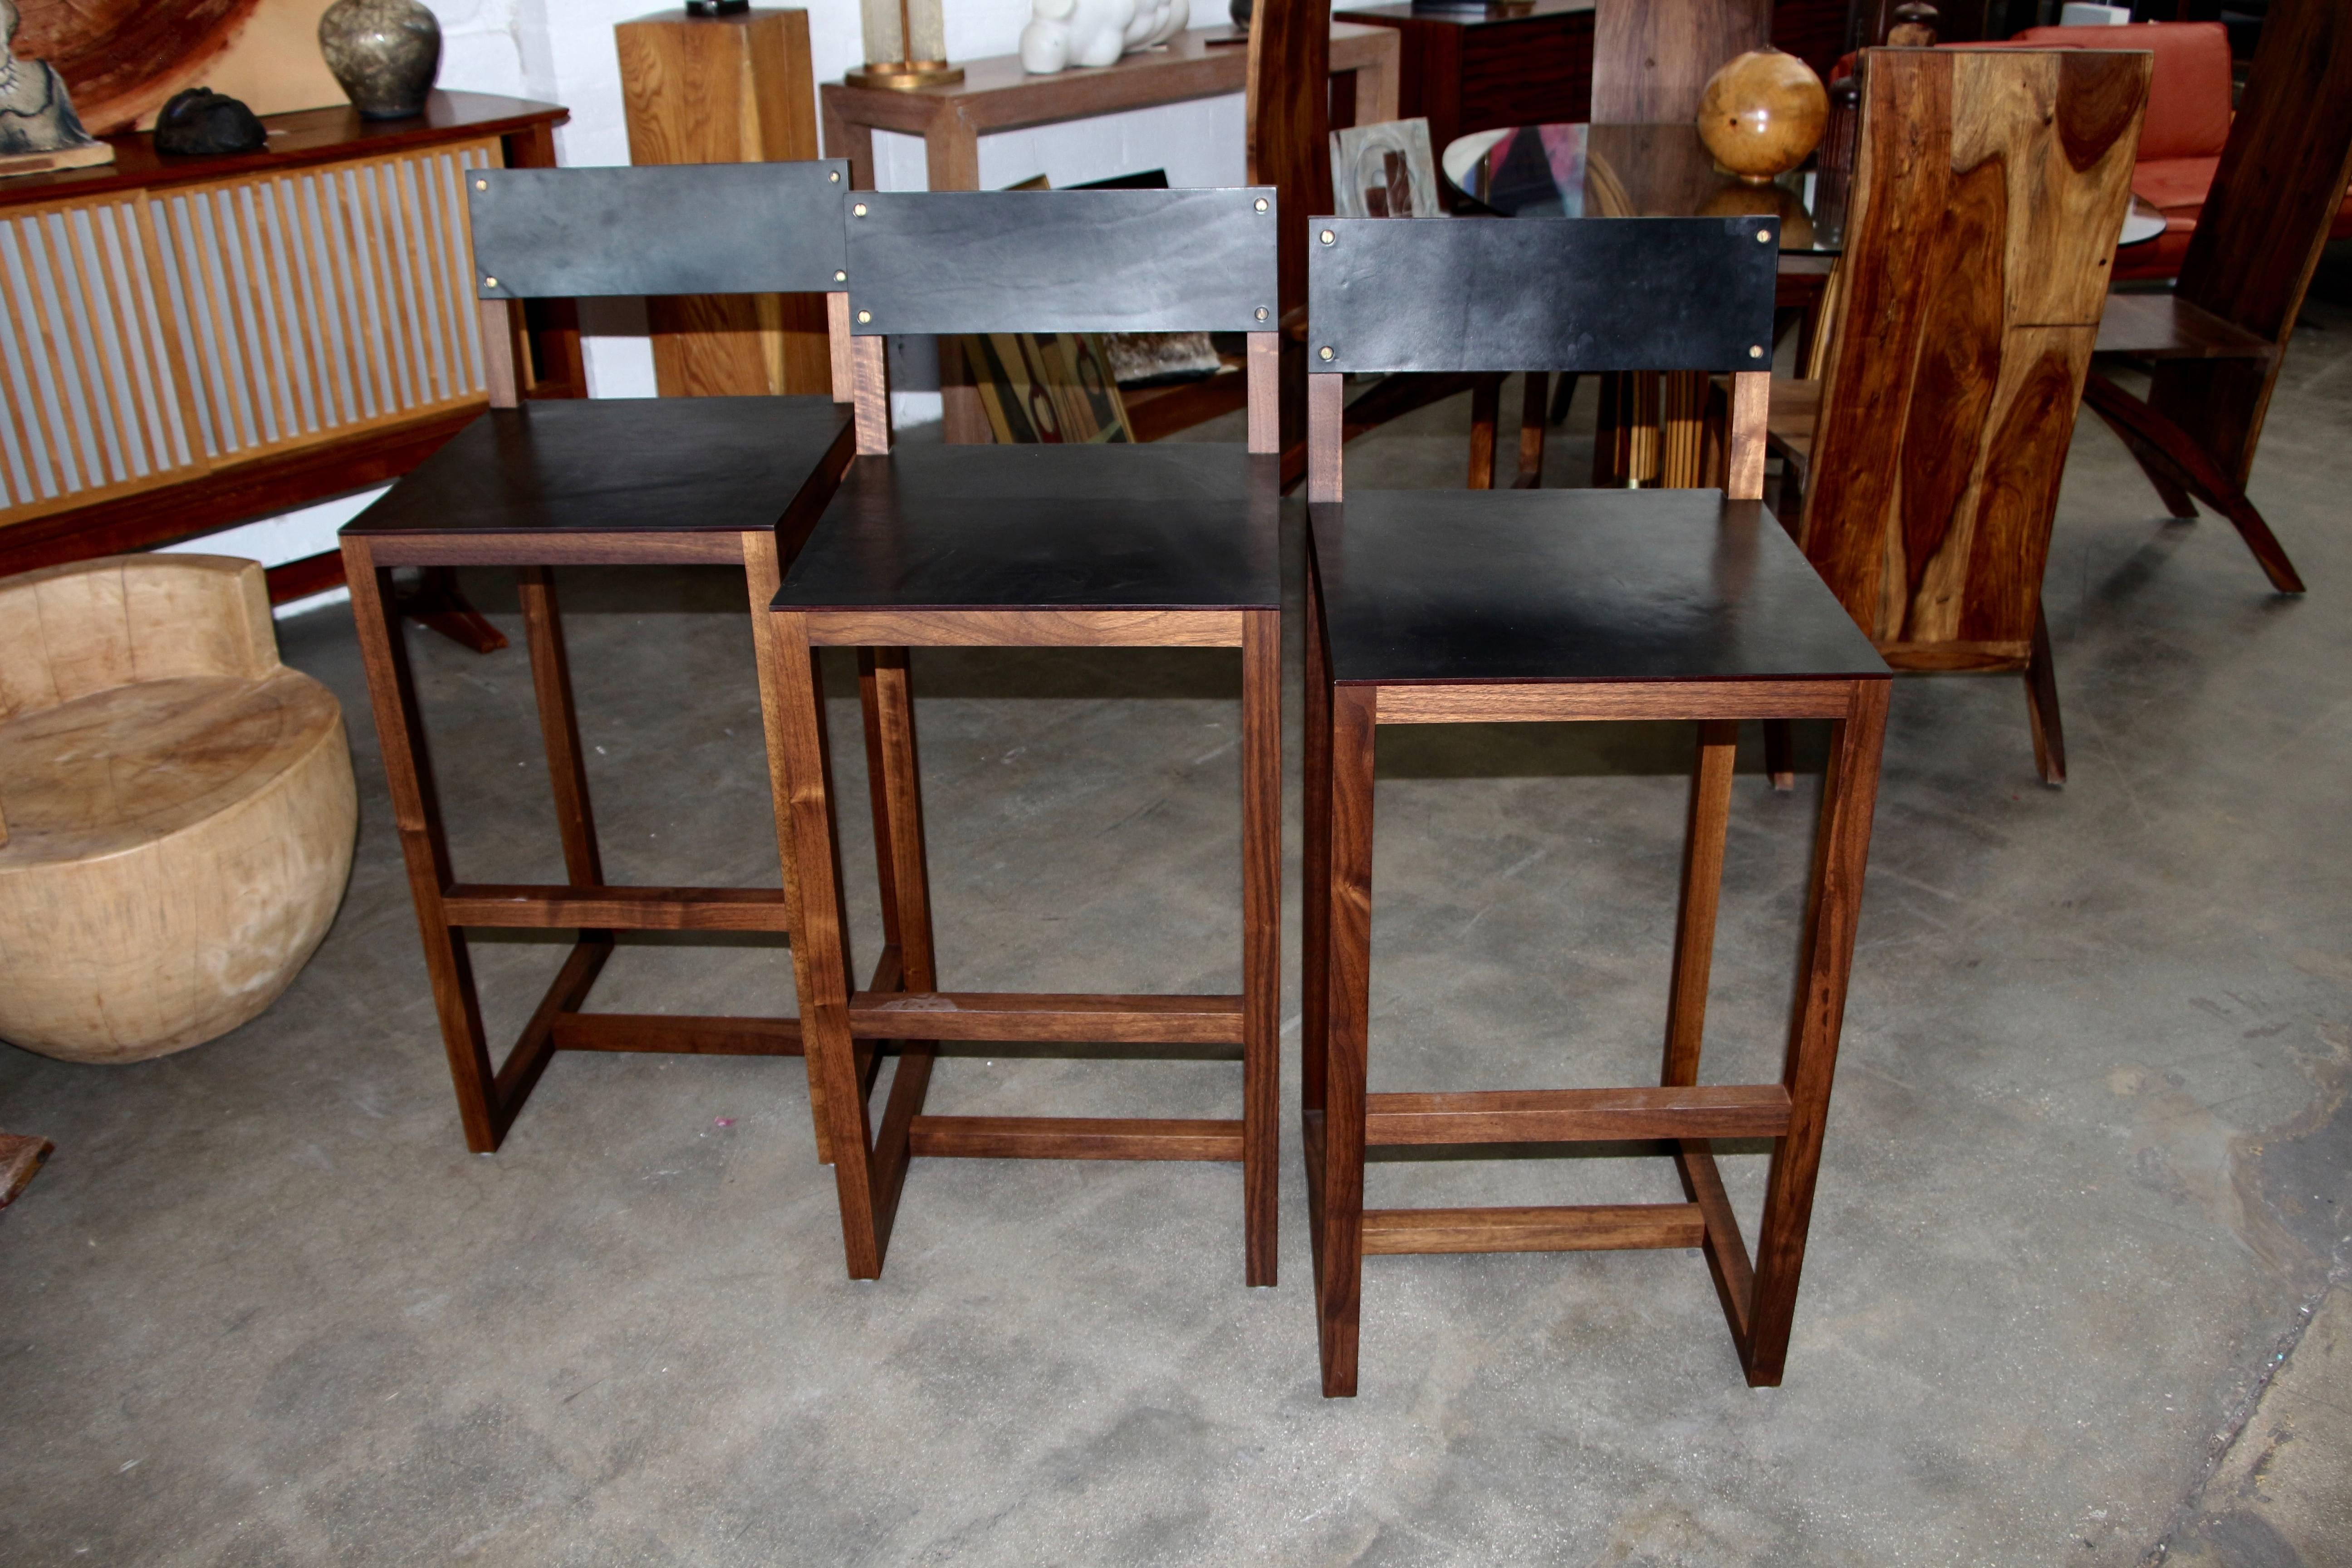 I believe these are out of the BDDW's Elgin line and they are very elegant gently used bar stools. These are from the early production of the company were purchased at least 10 years ago.

PLEASE TAKE A MOMENT TO VISIT OUR ART GALLERY ON 1STDIBS